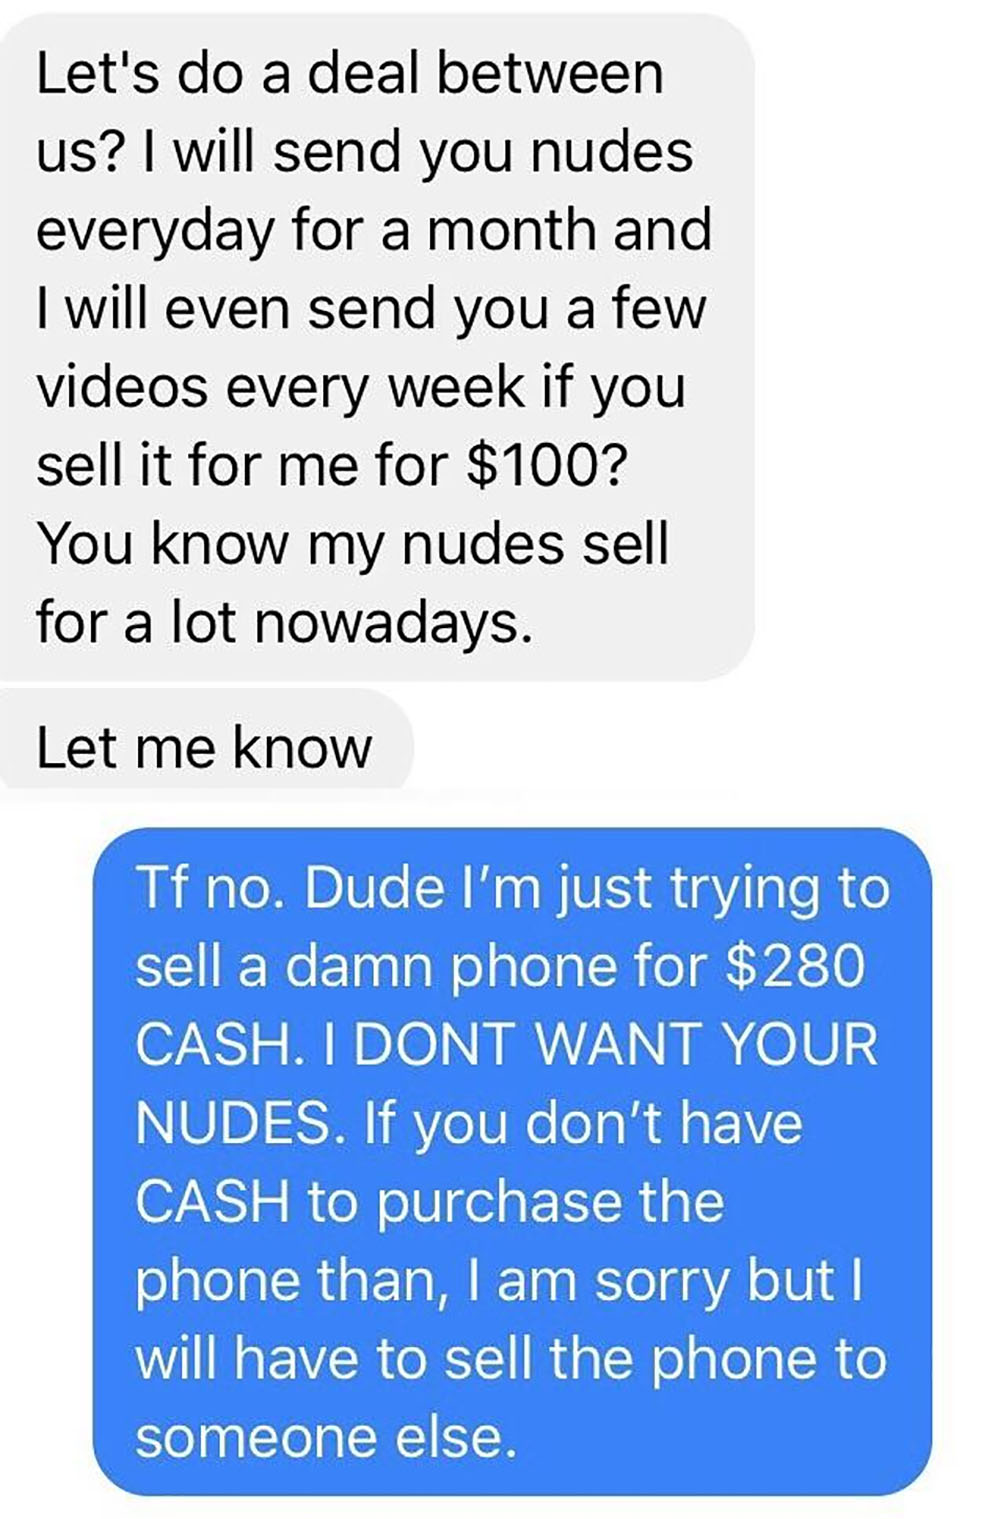 choosing beggars - number - Let's do a deal between us? I will send you nudes everyday for a month and I will even send you a few videos every week if you sell it for me for $100? You know my nudes sell for a lot nowadays. Let me know Tf no. Dude I'm just